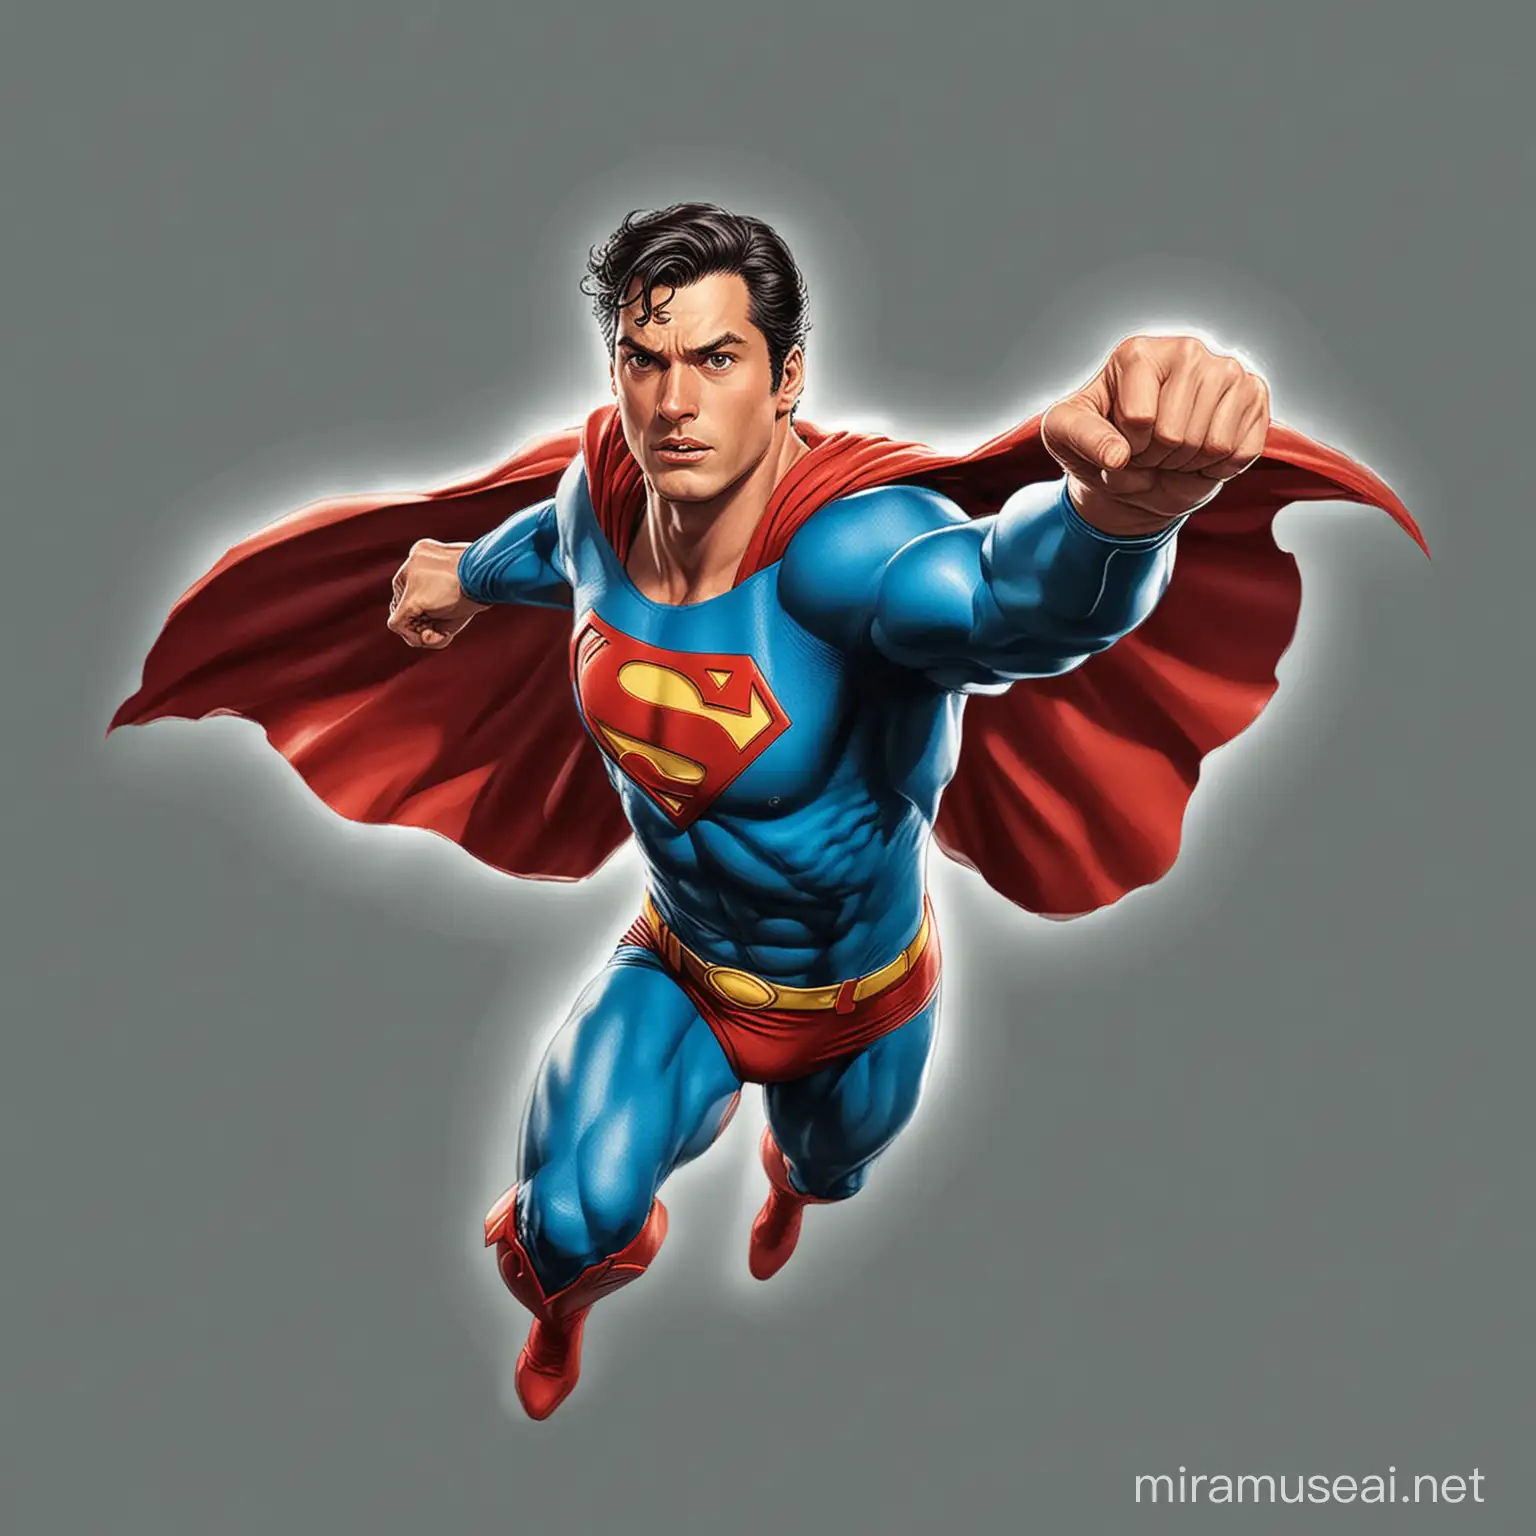 generate a sticker type image of flying superman